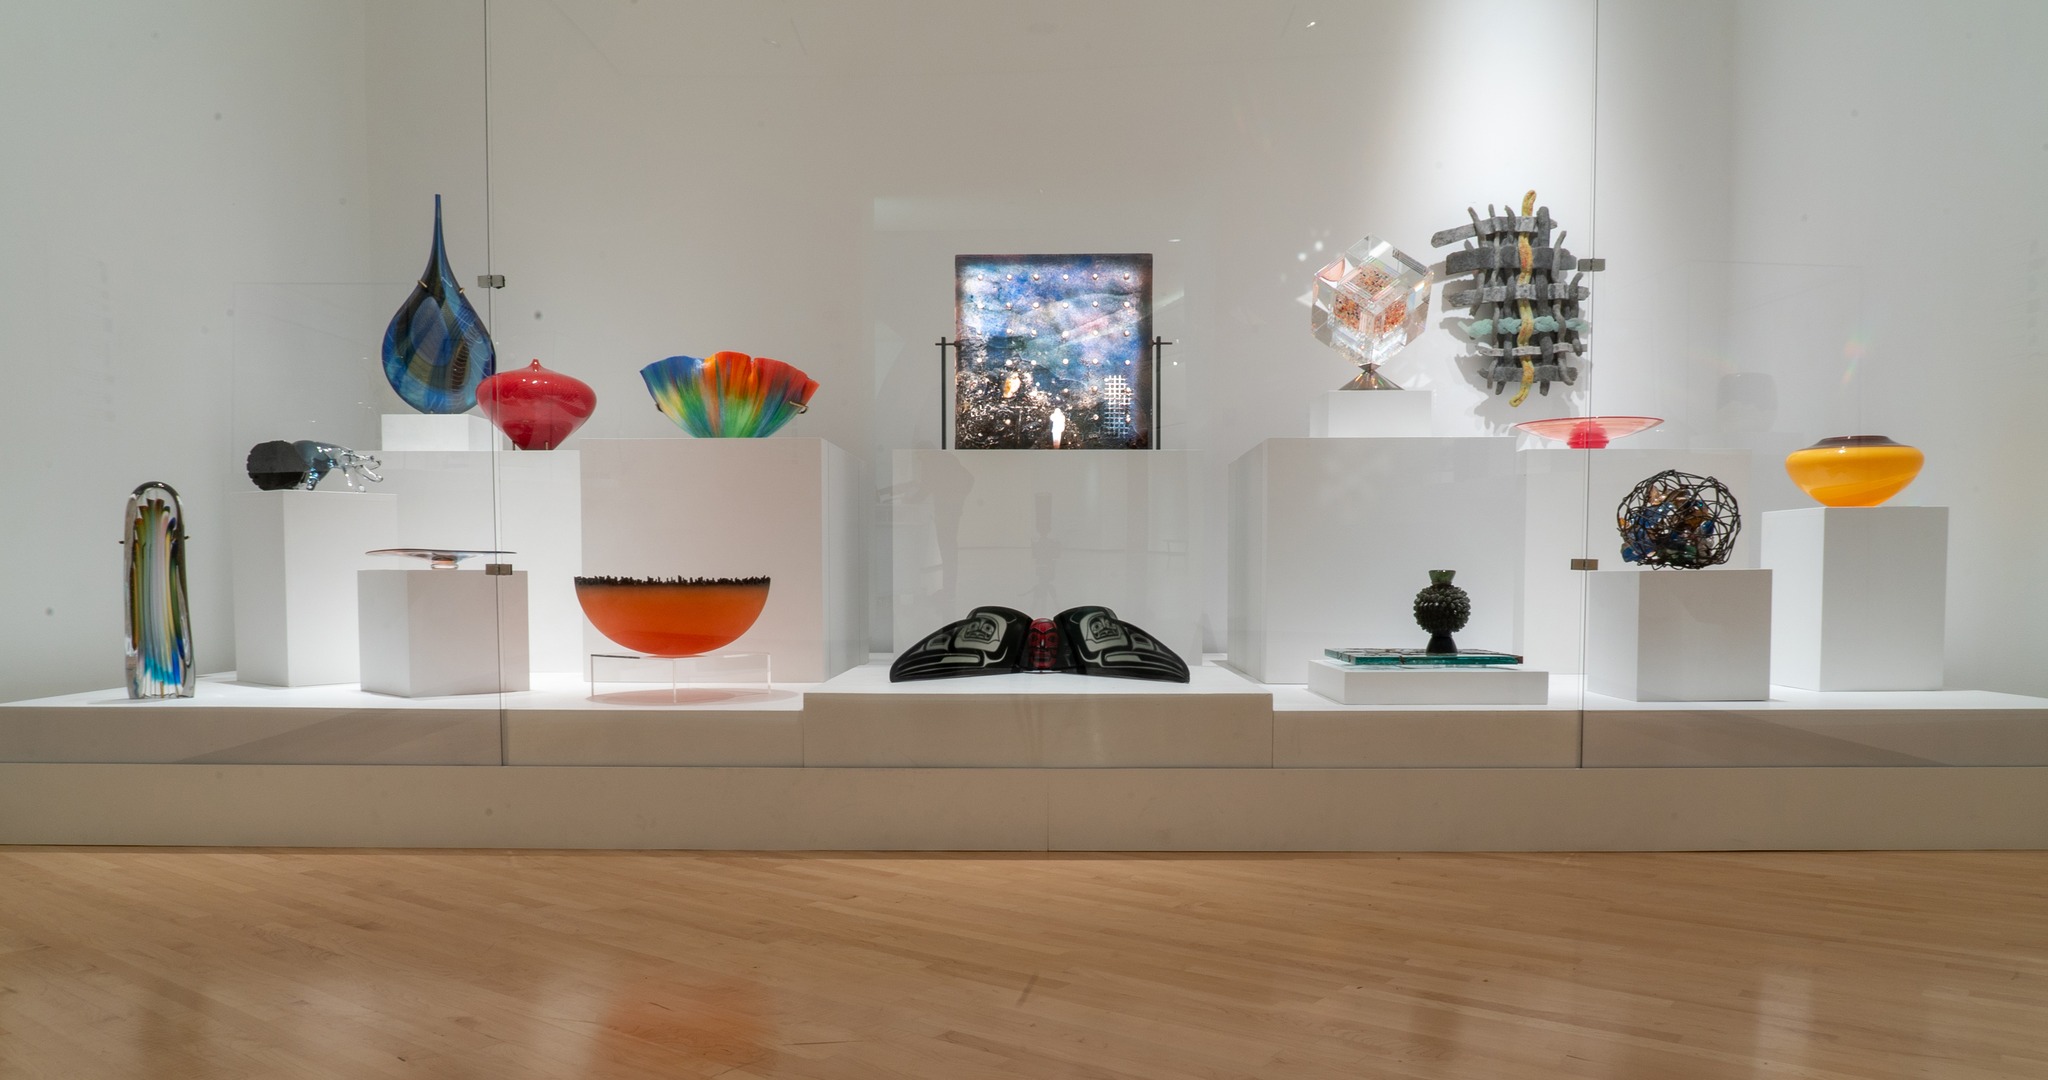 Gallery featuring several glass works in bright, bold colors